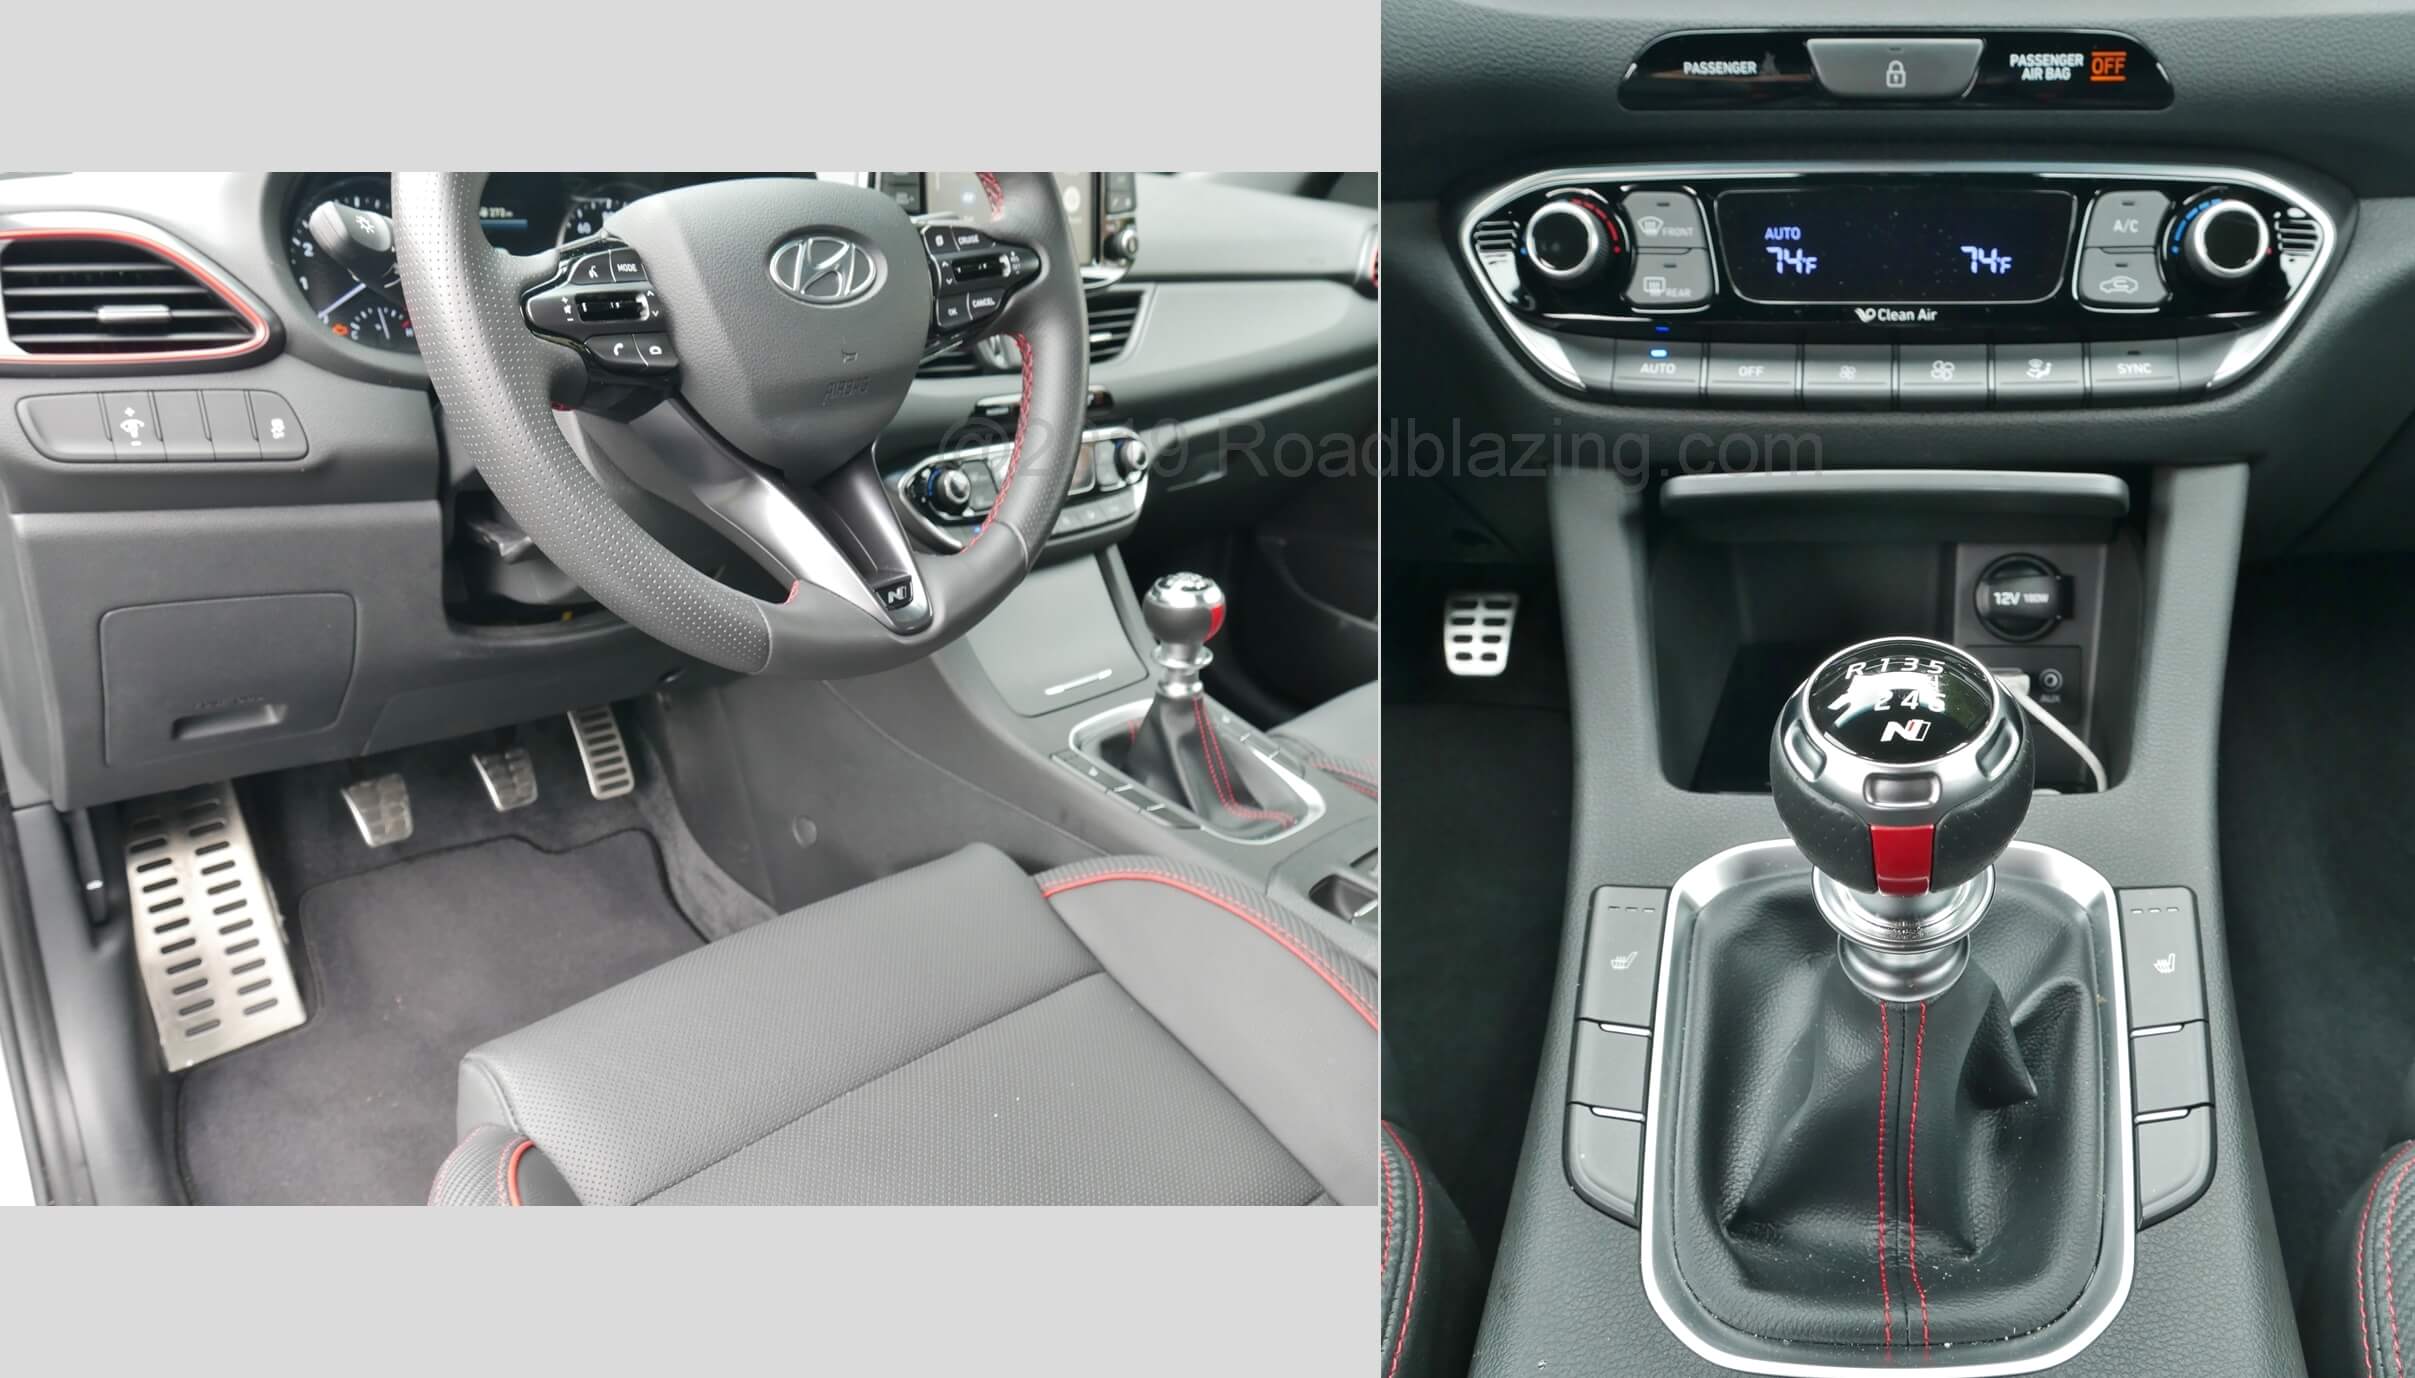 2019 Hyundai Elantra GT N-Line: N-Line cabin treatments include unique heated, leather wrapped tilt, telescoping steering wheel and red striped shifter head, all with red contrast stitching